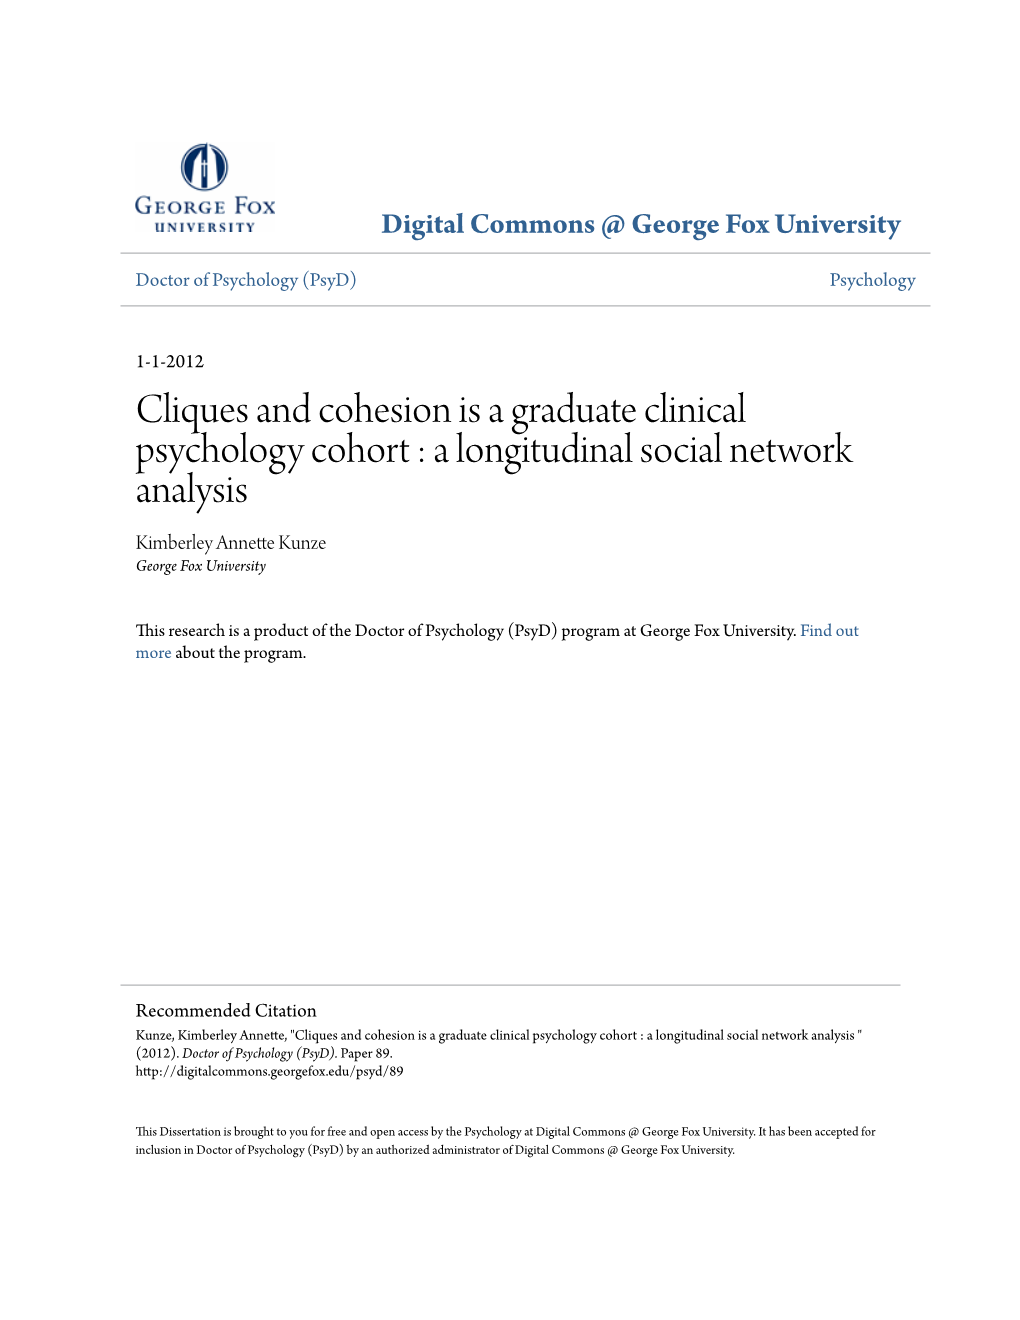 Cliques and Cohesion Is a Graduate Clinical Psychology Cohort : a Longitudinal Social Network Analysis Kimberley Annette Kunze George Fox University